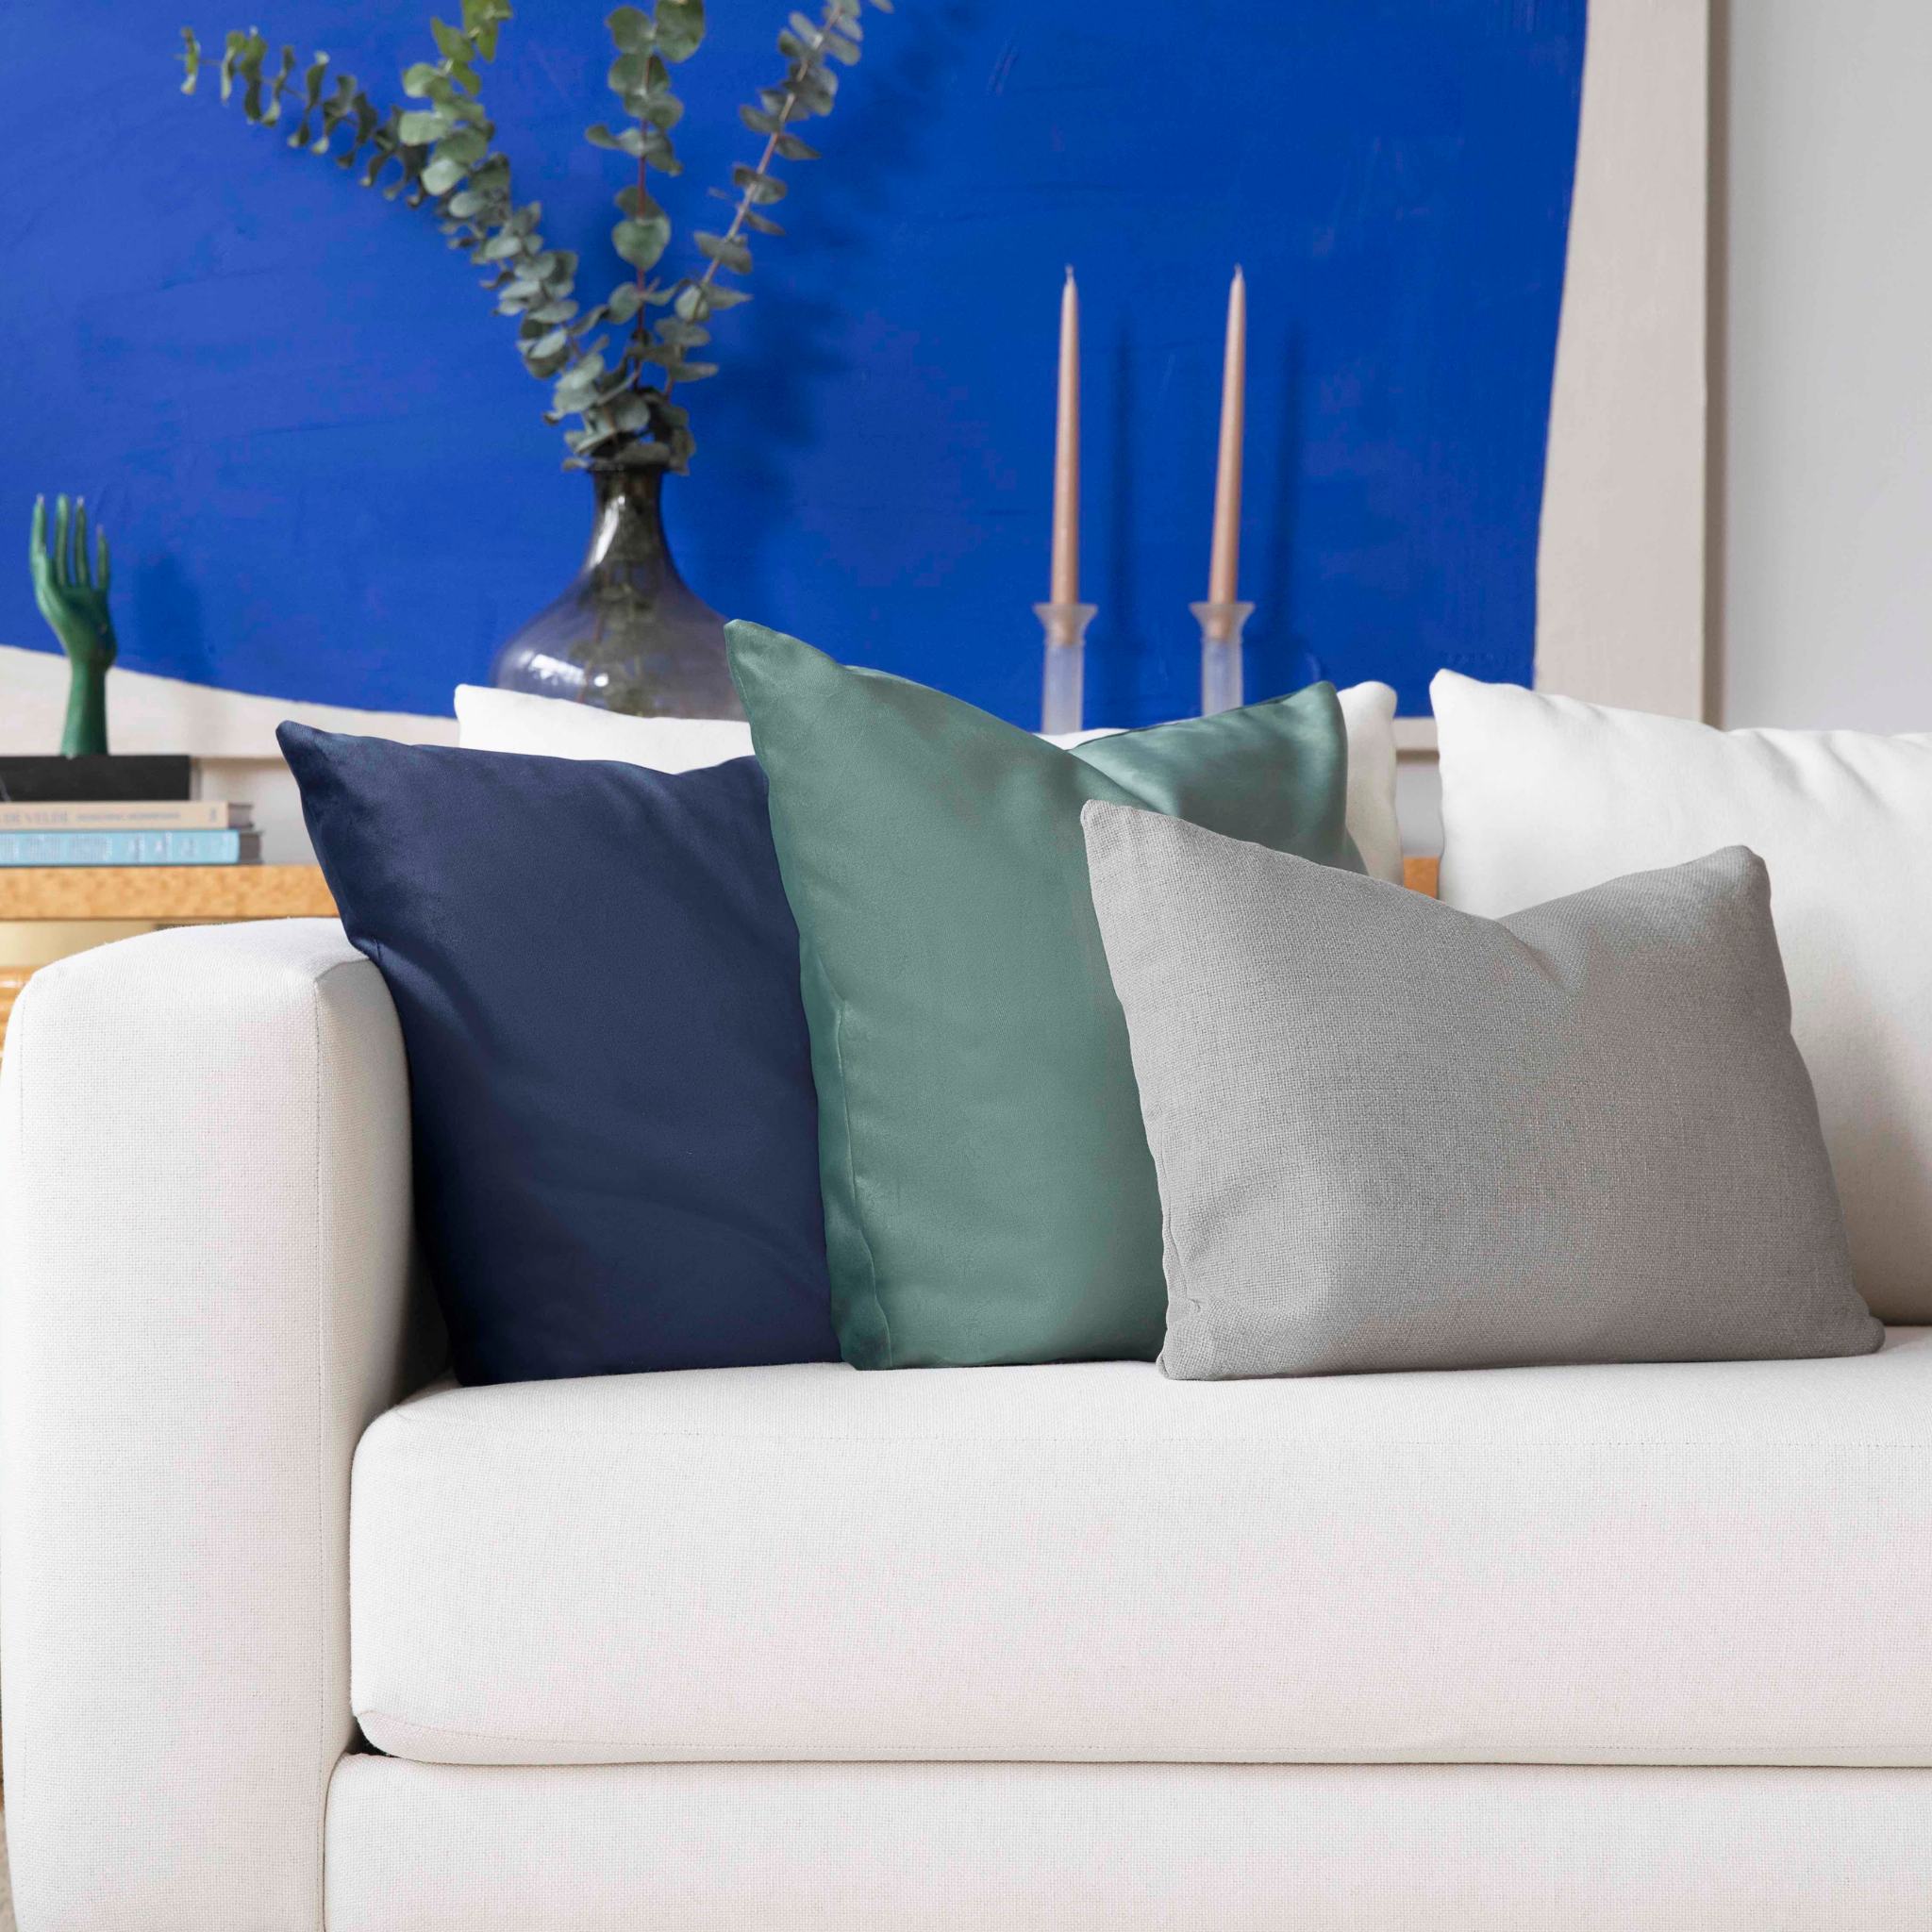 Colorful throw pillows on a white couch with blue artwork in the background